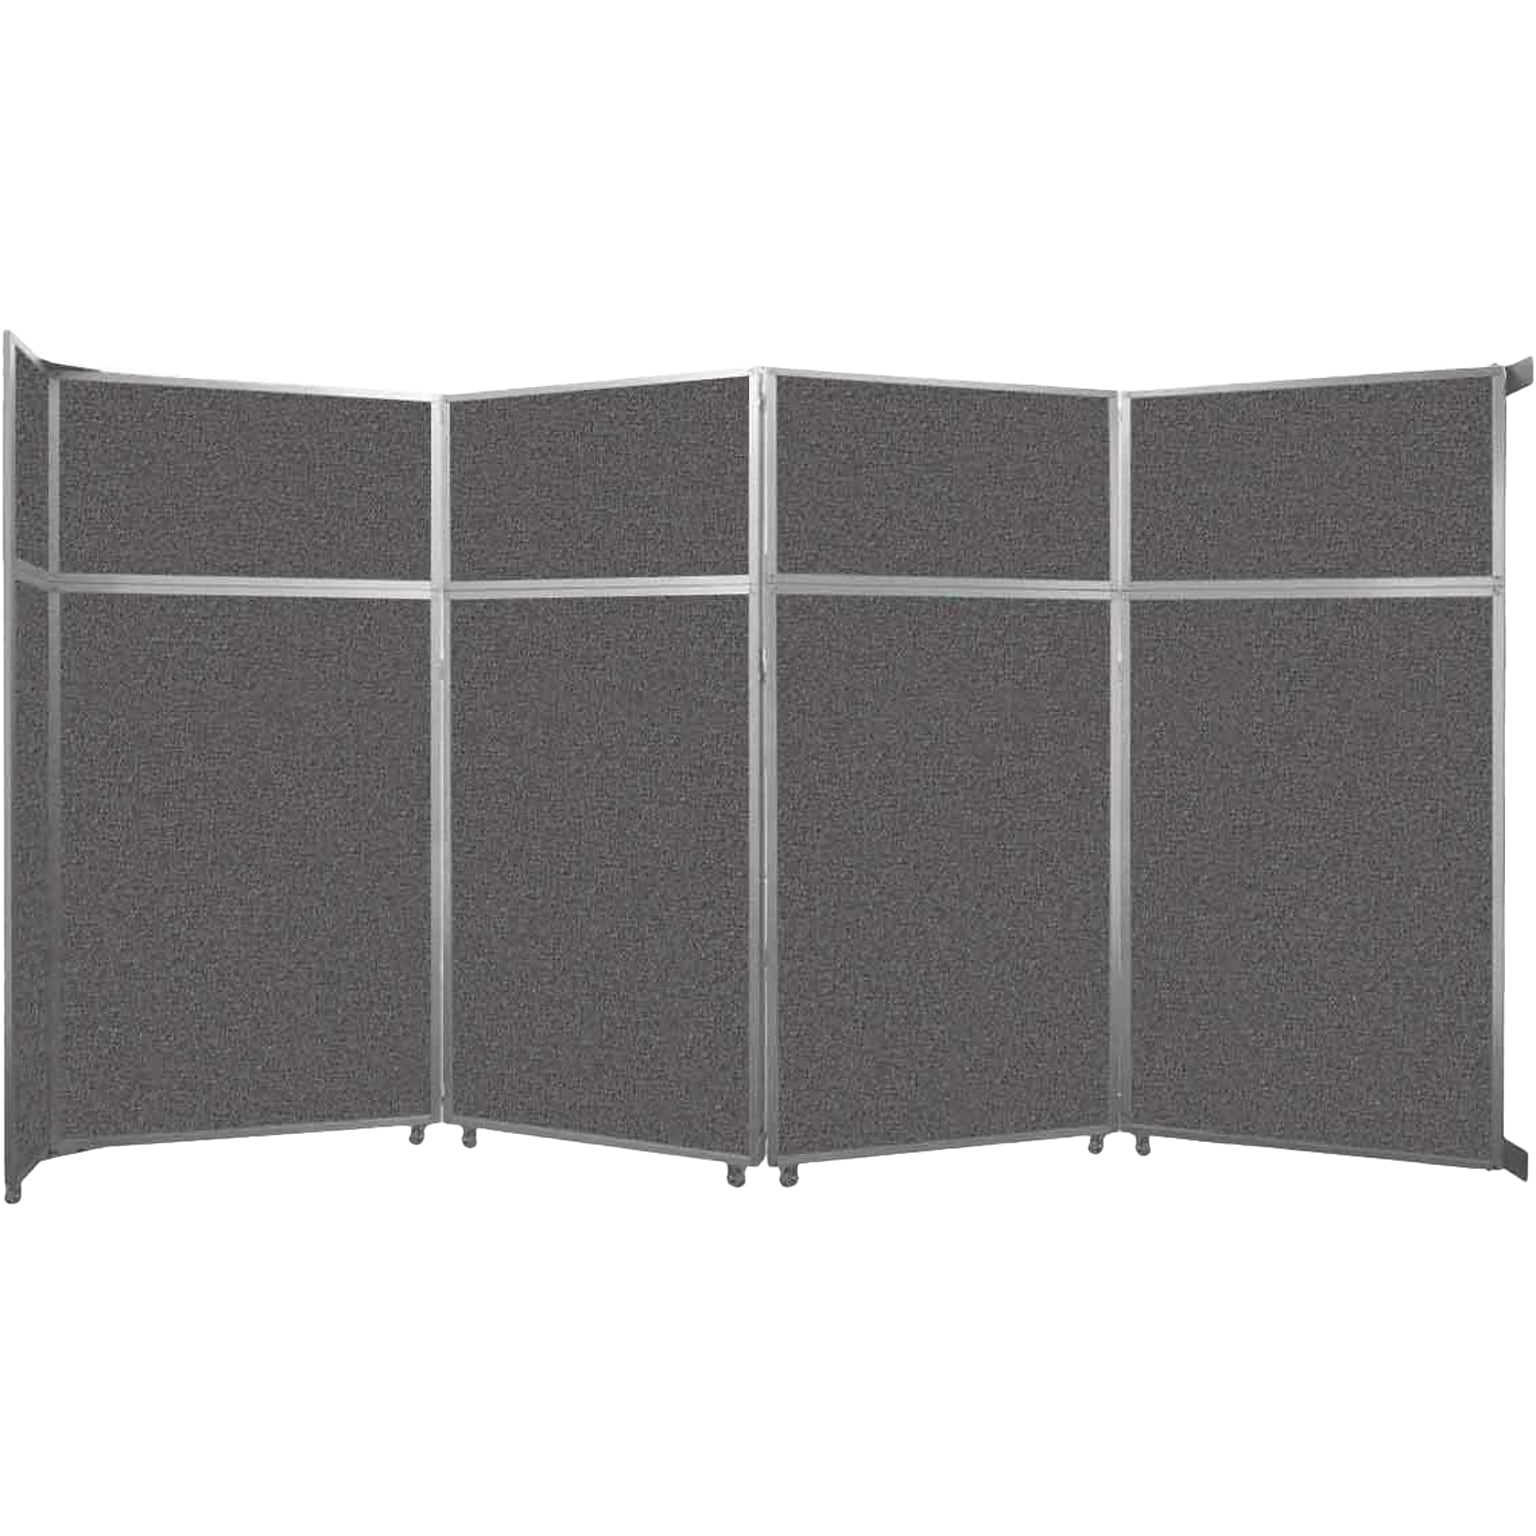 Versare Operable Wall Clamp Mount Folding Room Divider, 101.25H x 187W, Charcoal Gray Fabric (1070407)